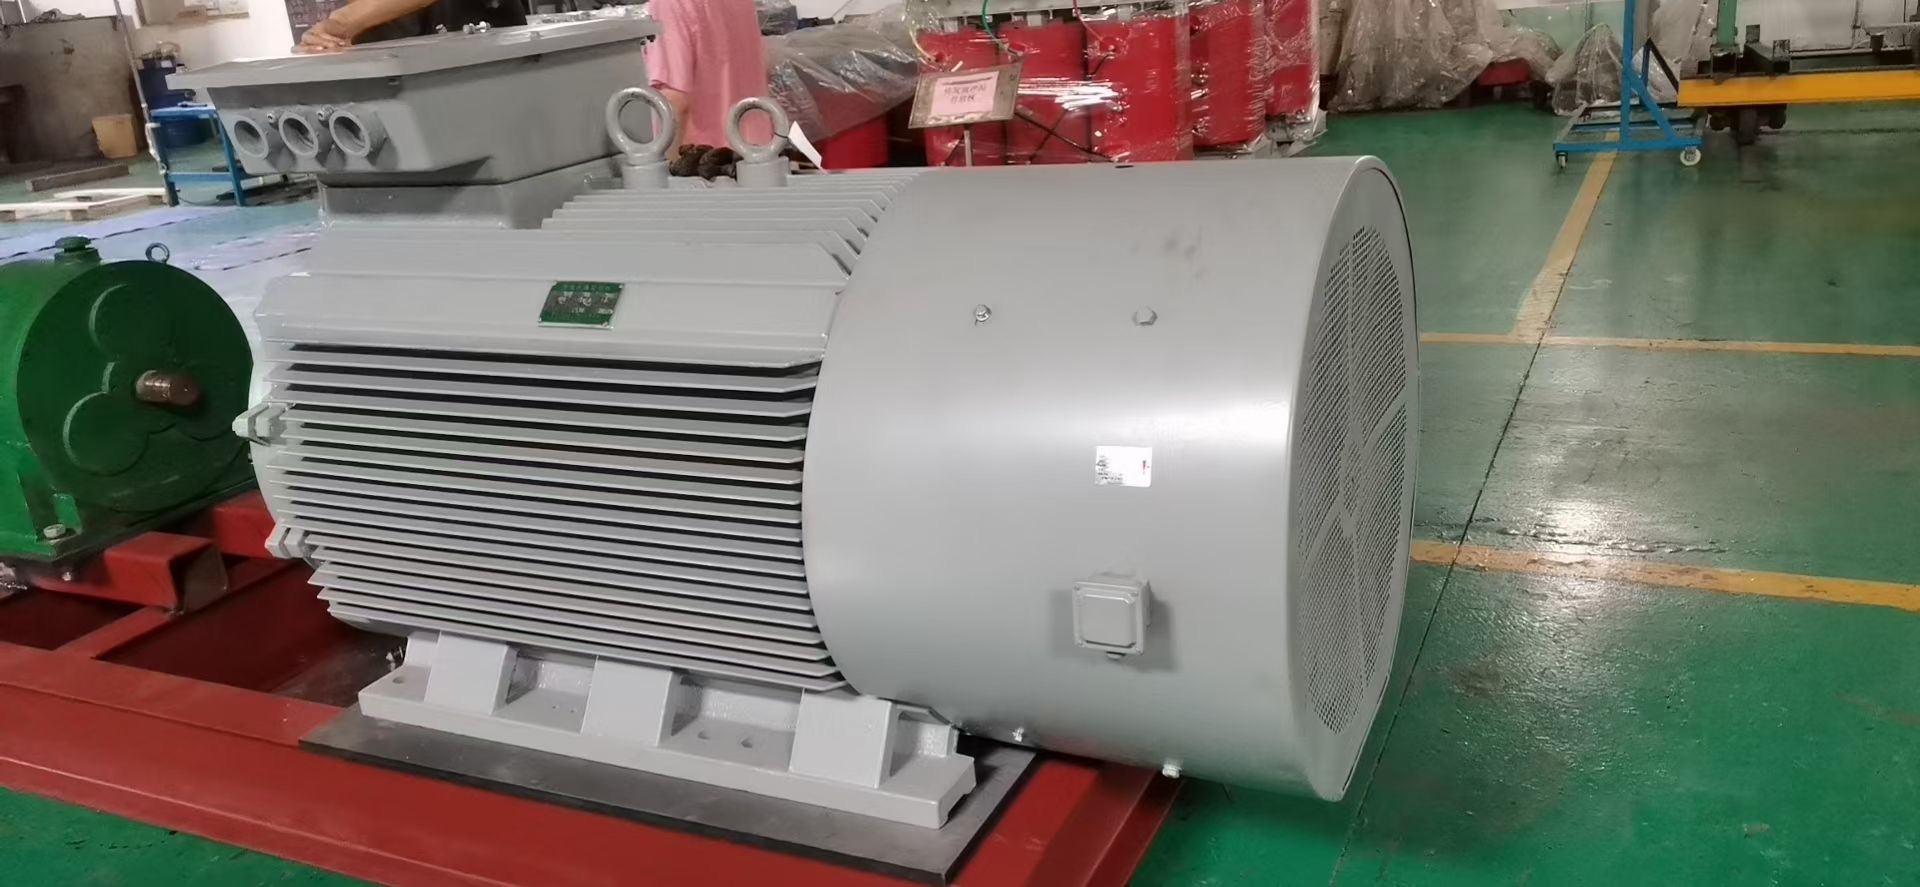 What is an inverter duty motor